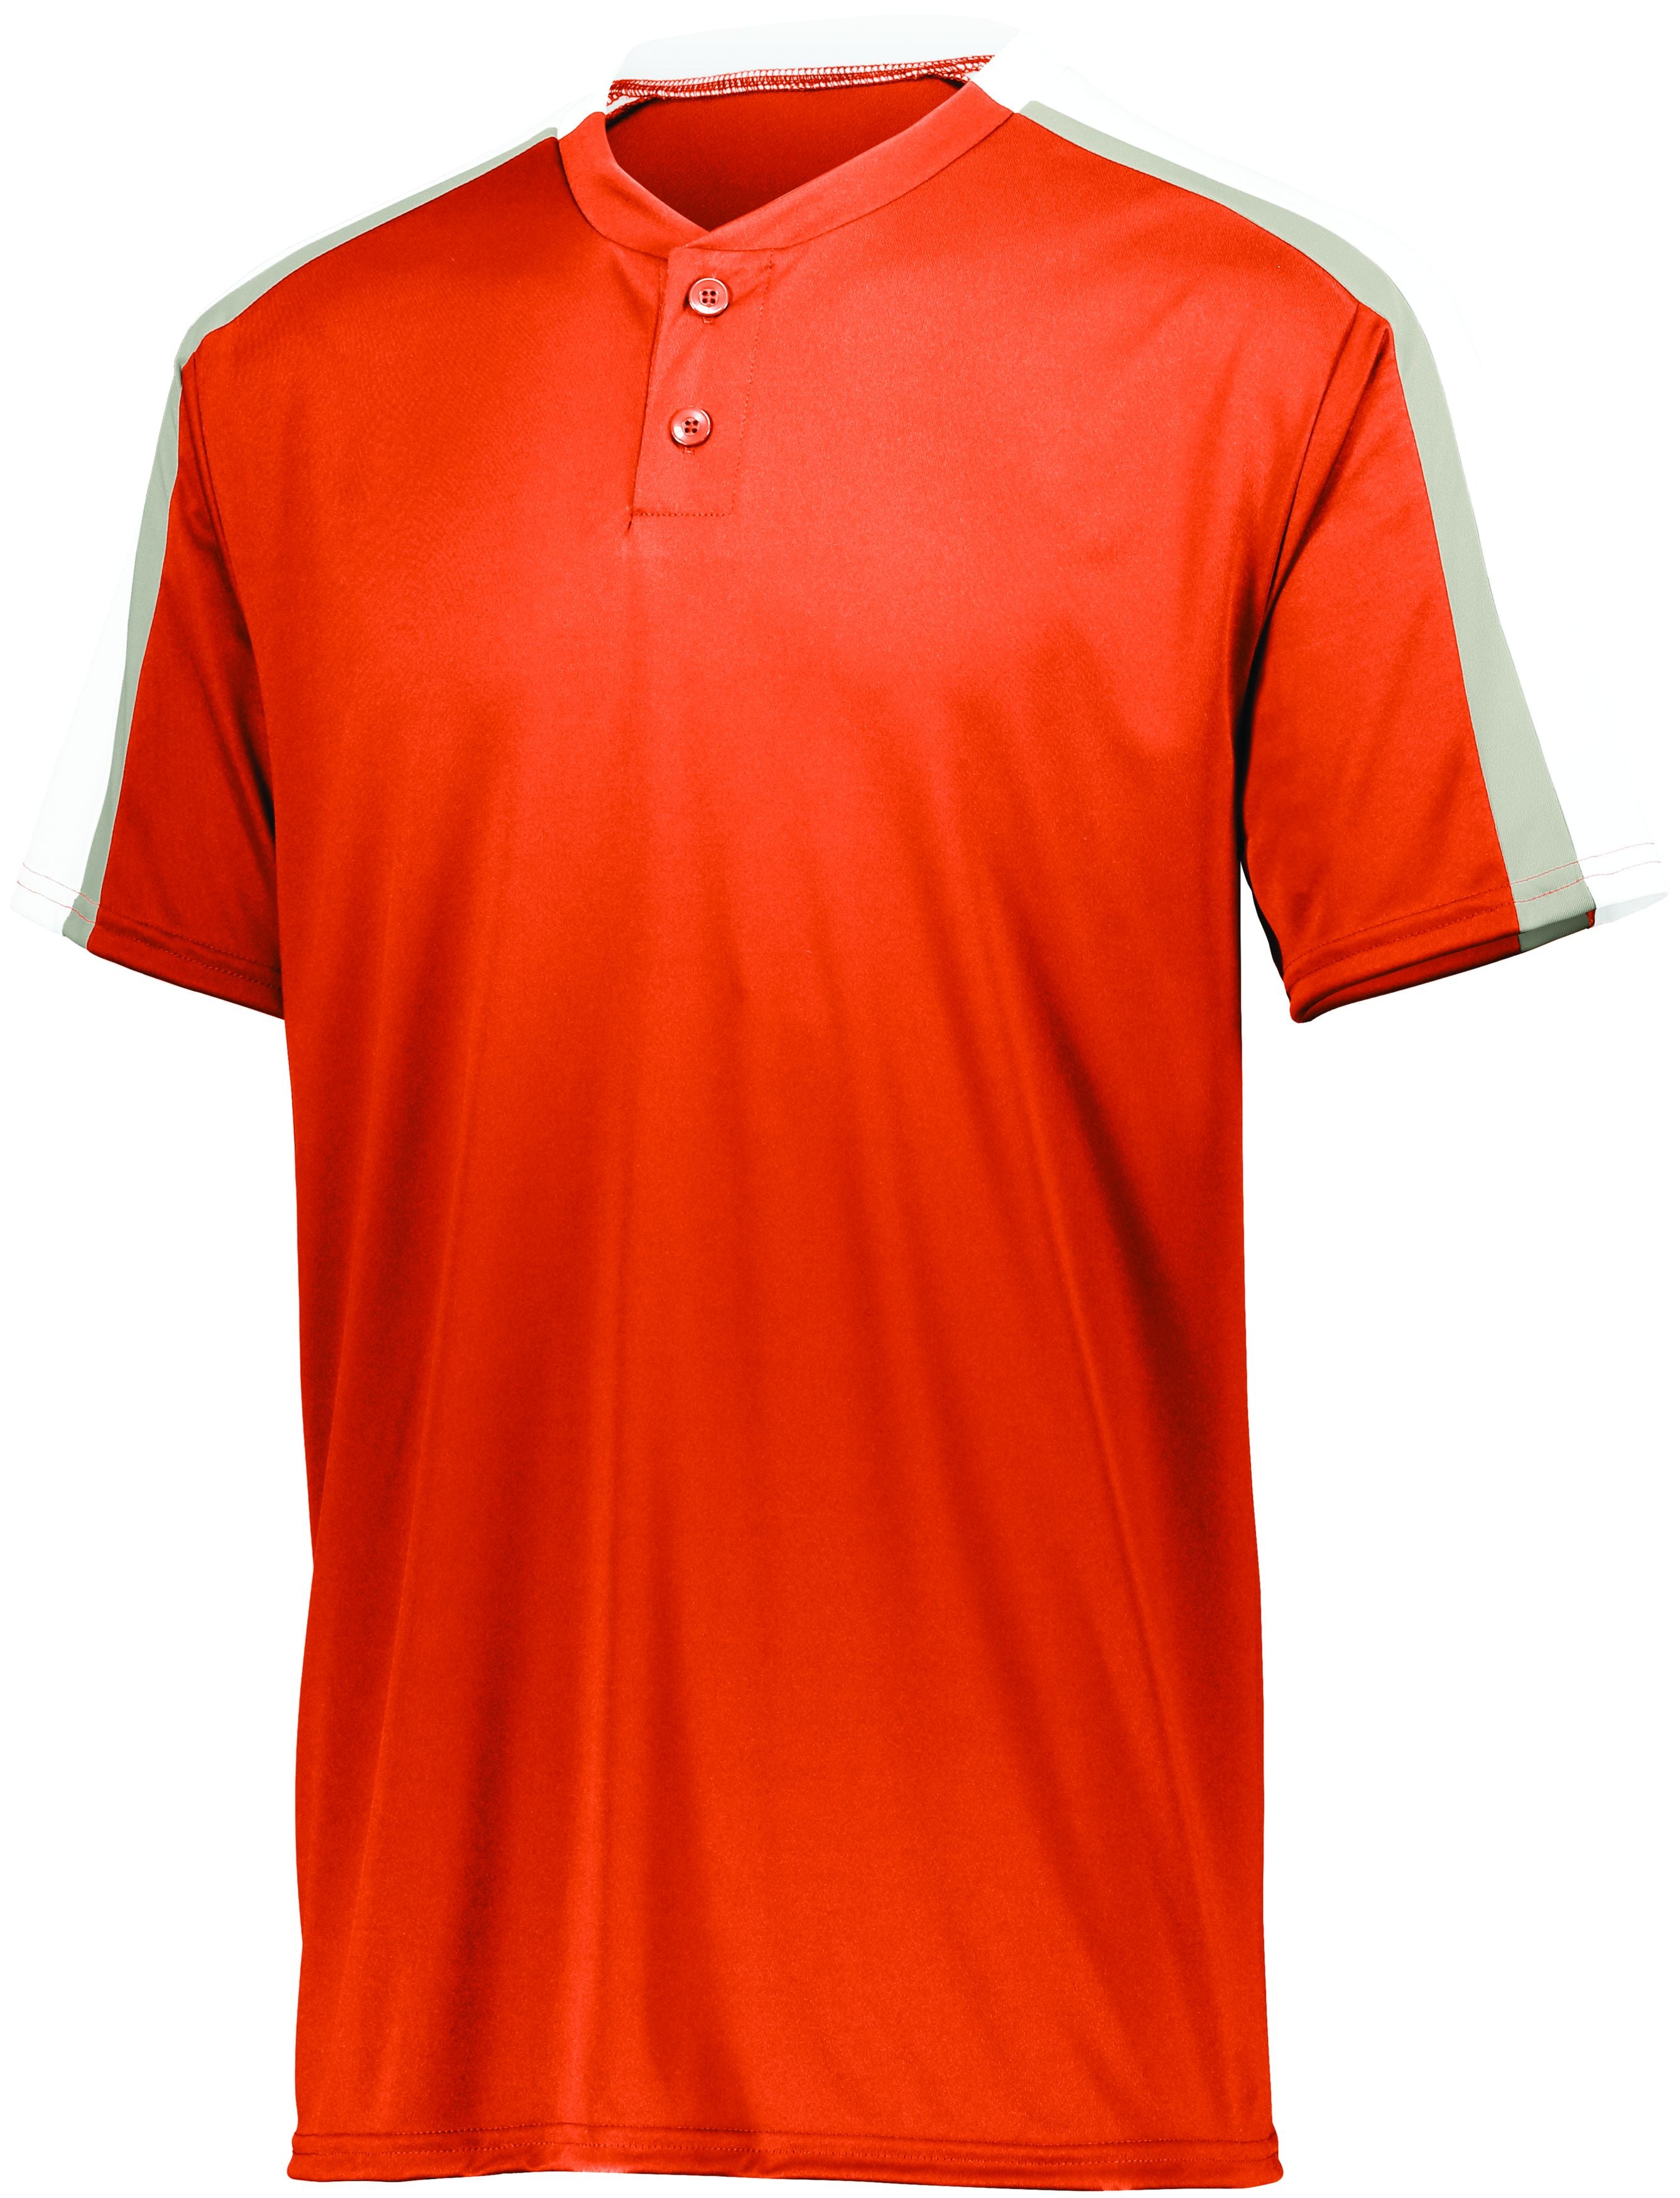 Augusta Sportswear Youth Power Plus Jersey 2.0 in Orange/White/Silver Grey  -Part of the Youth, Youth-Jersey, Augusta-Products, Baseball, Shirts, All-Sports, All-Sports-1 product lines at KanaleyCreations.com